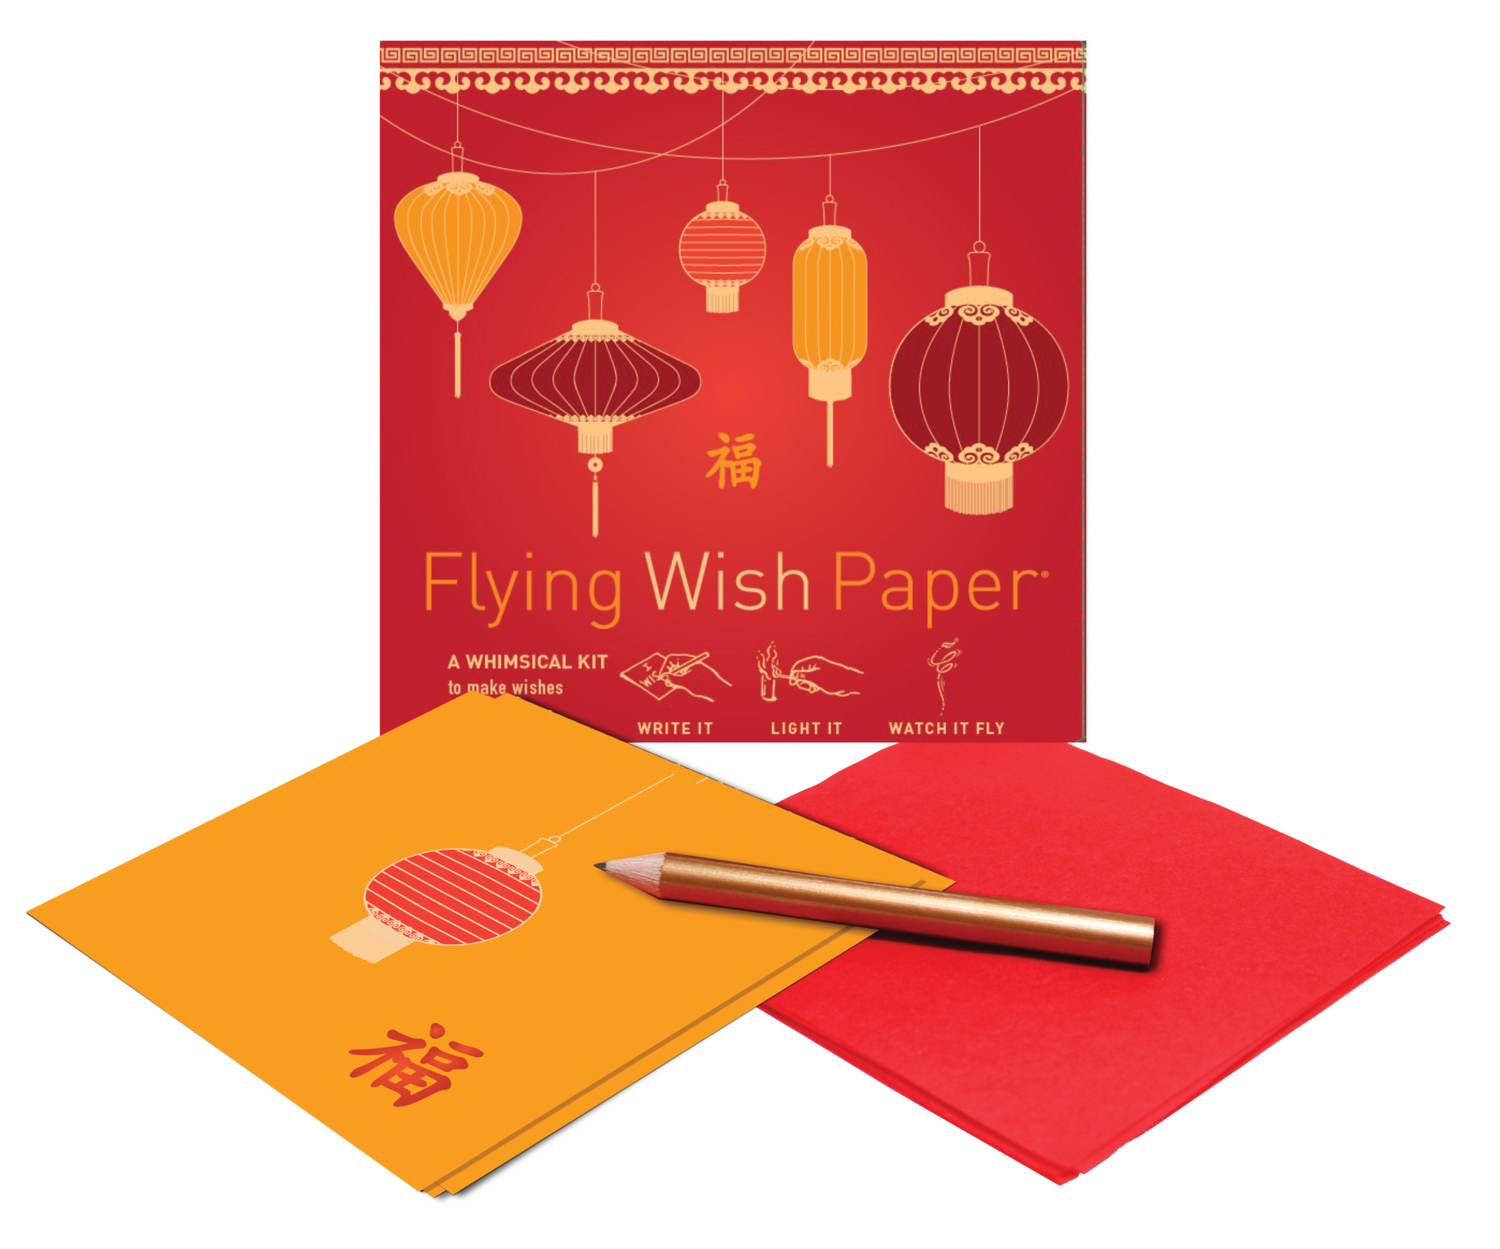 Let your wishes fly away with Flying Wish Paper Good Fortune kit.